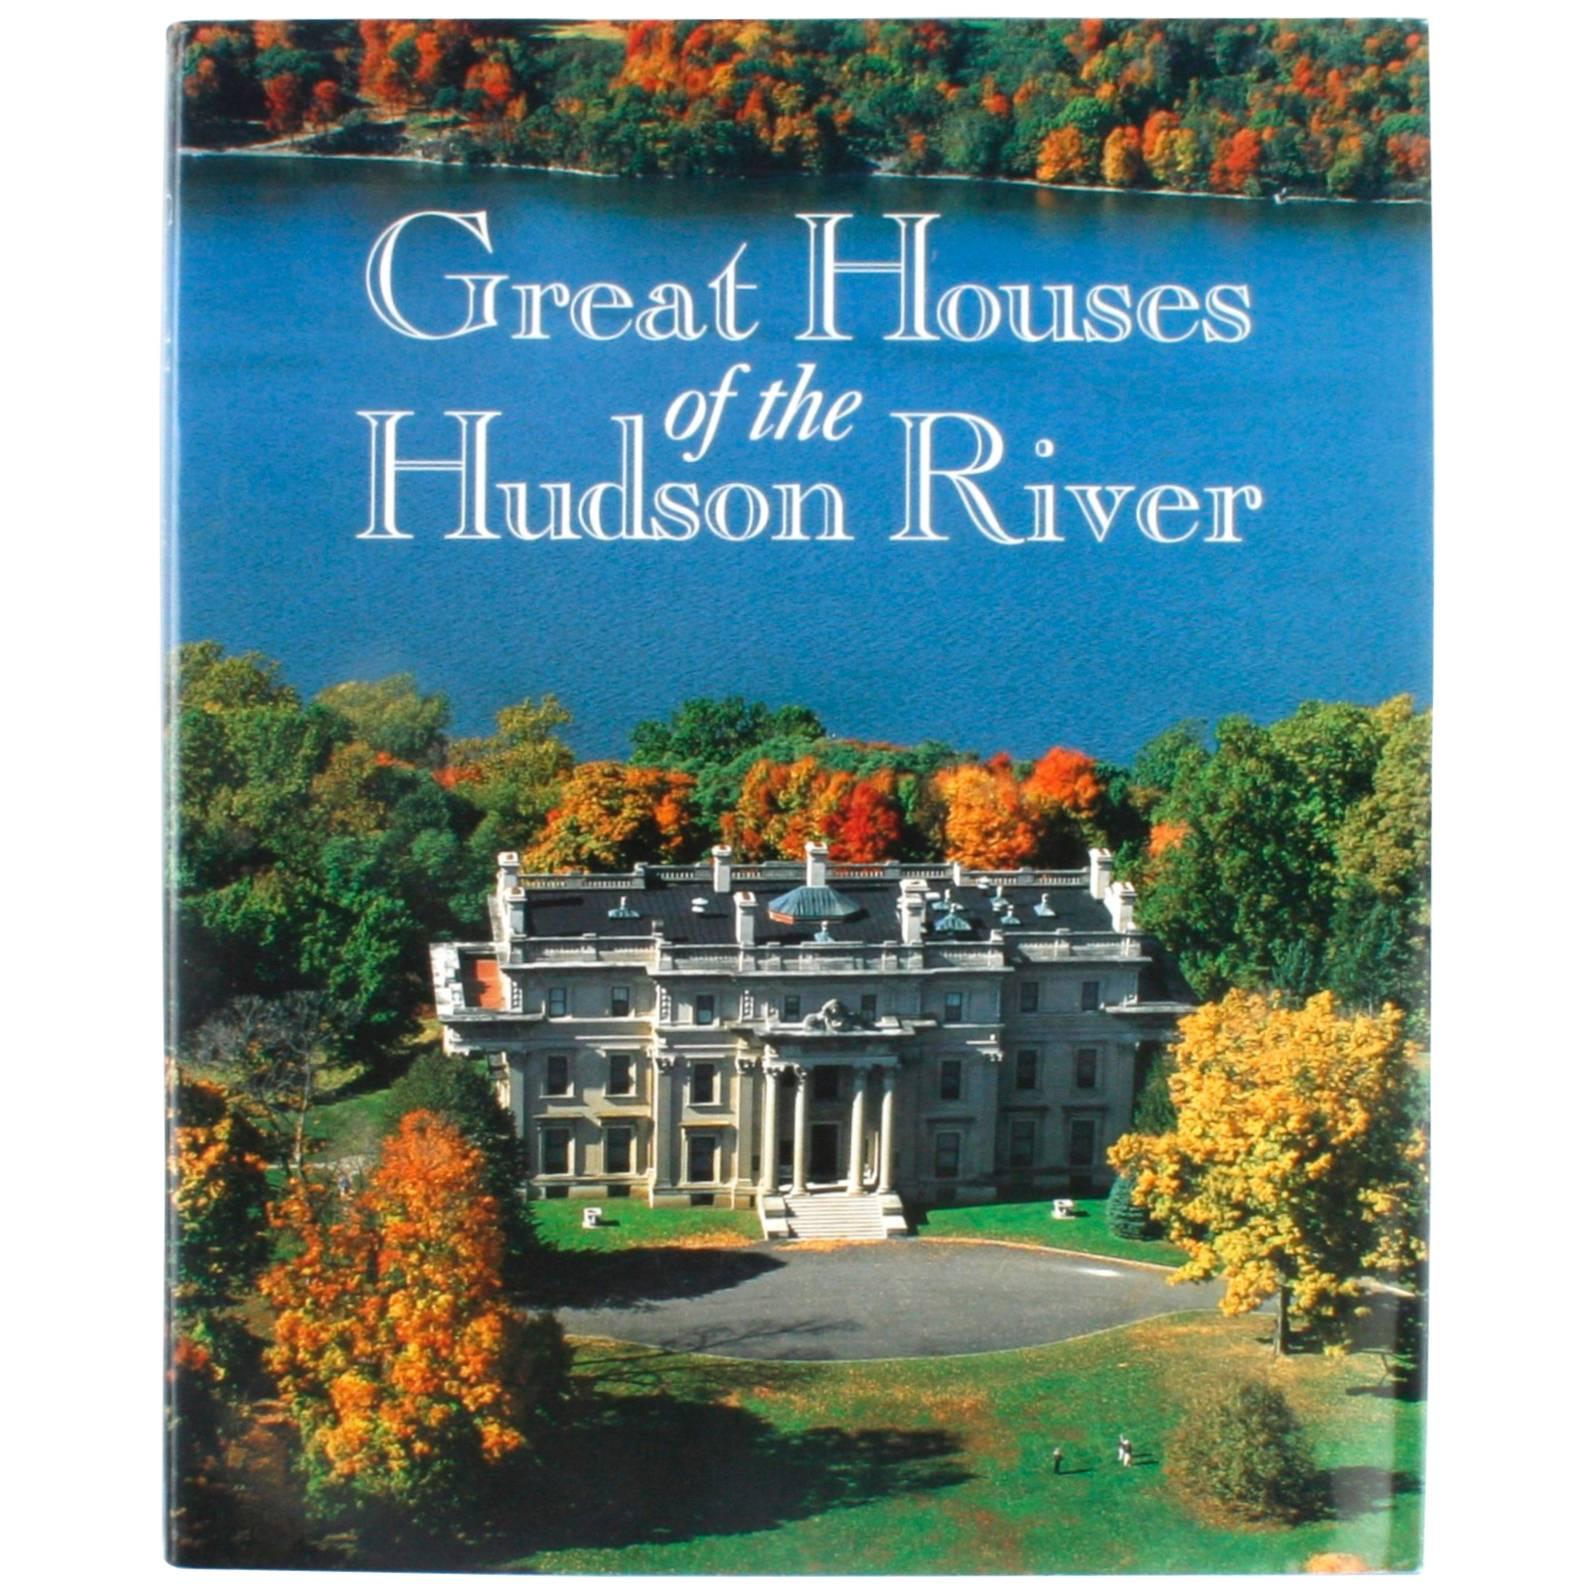 "Great Houses of the Hudson River", First Edition Book